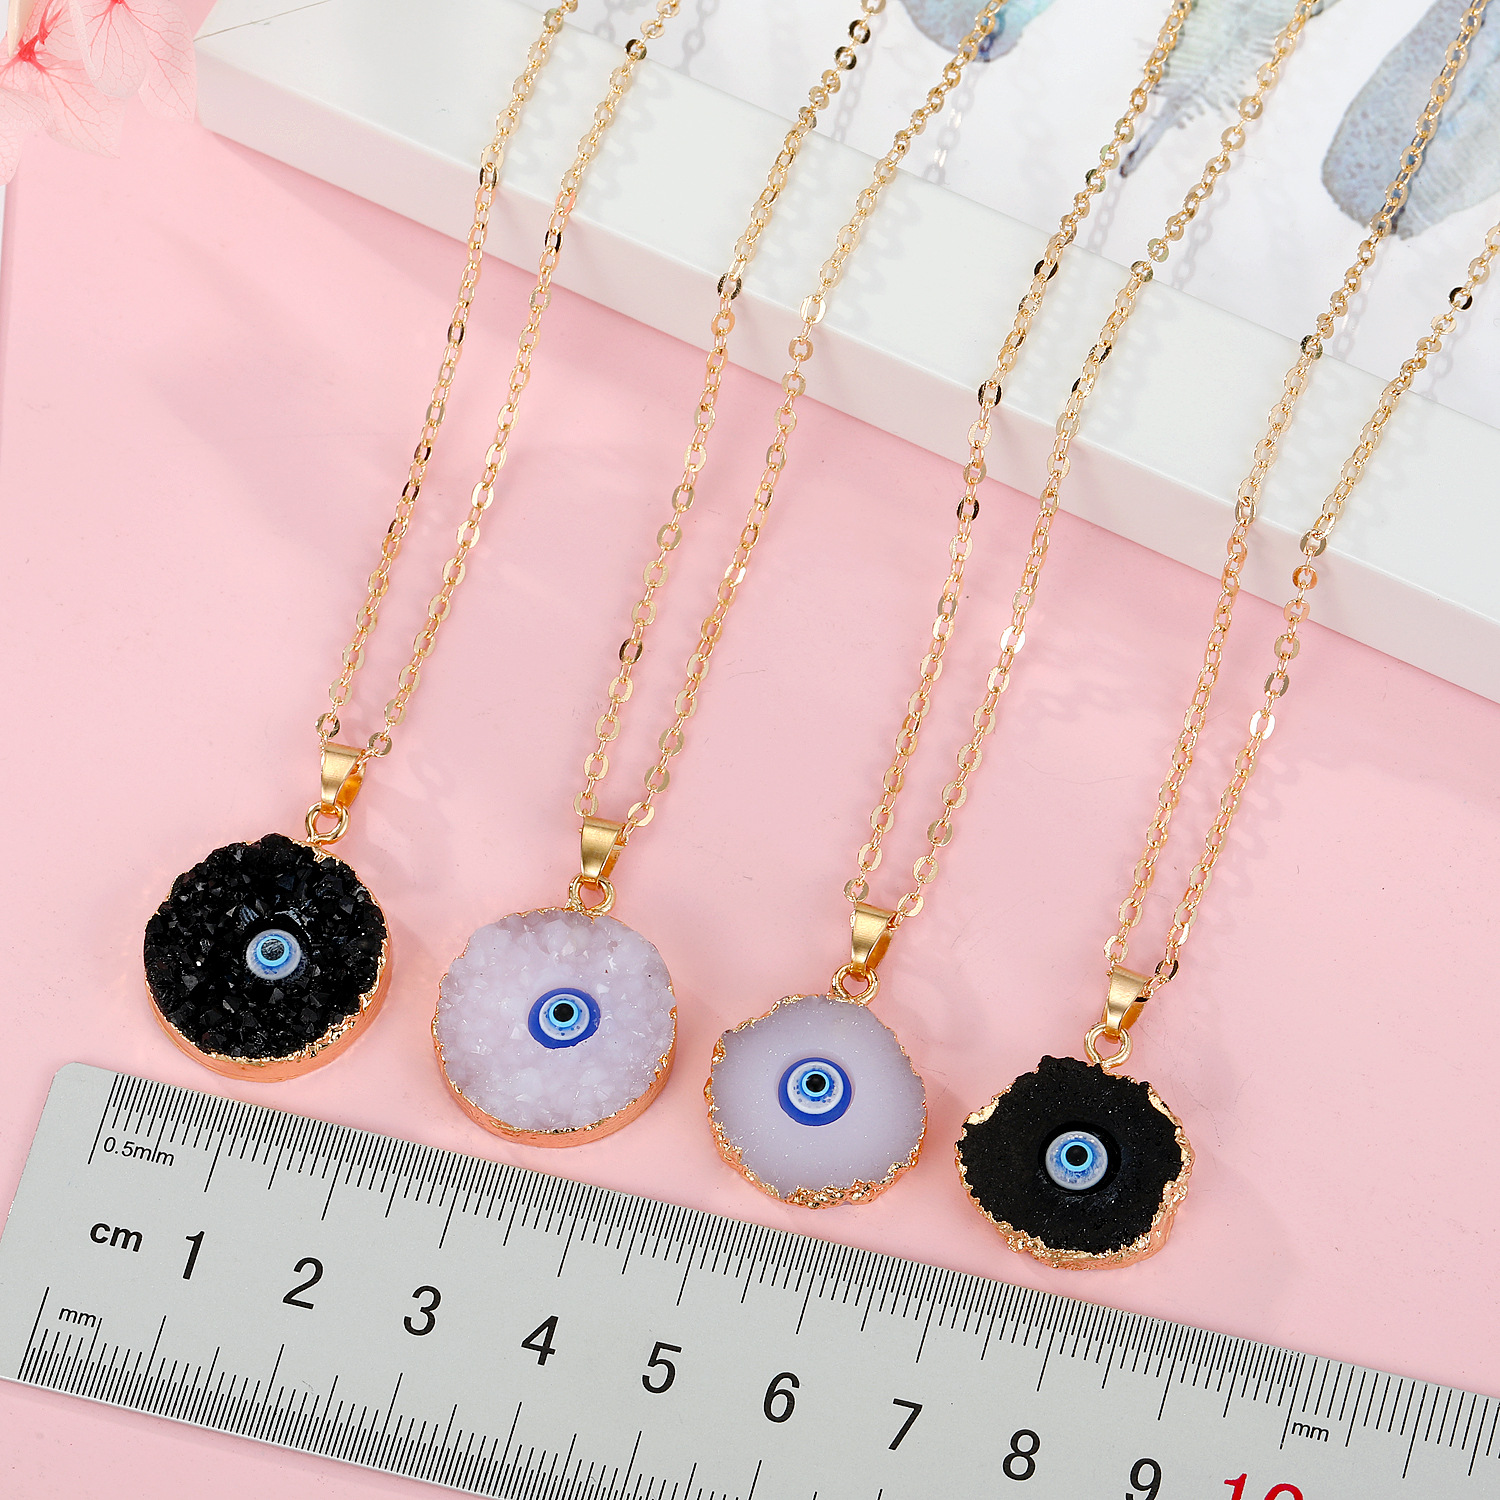 New style eye pendant necklace imitation natural stone love resin necklace wholesalepicture5